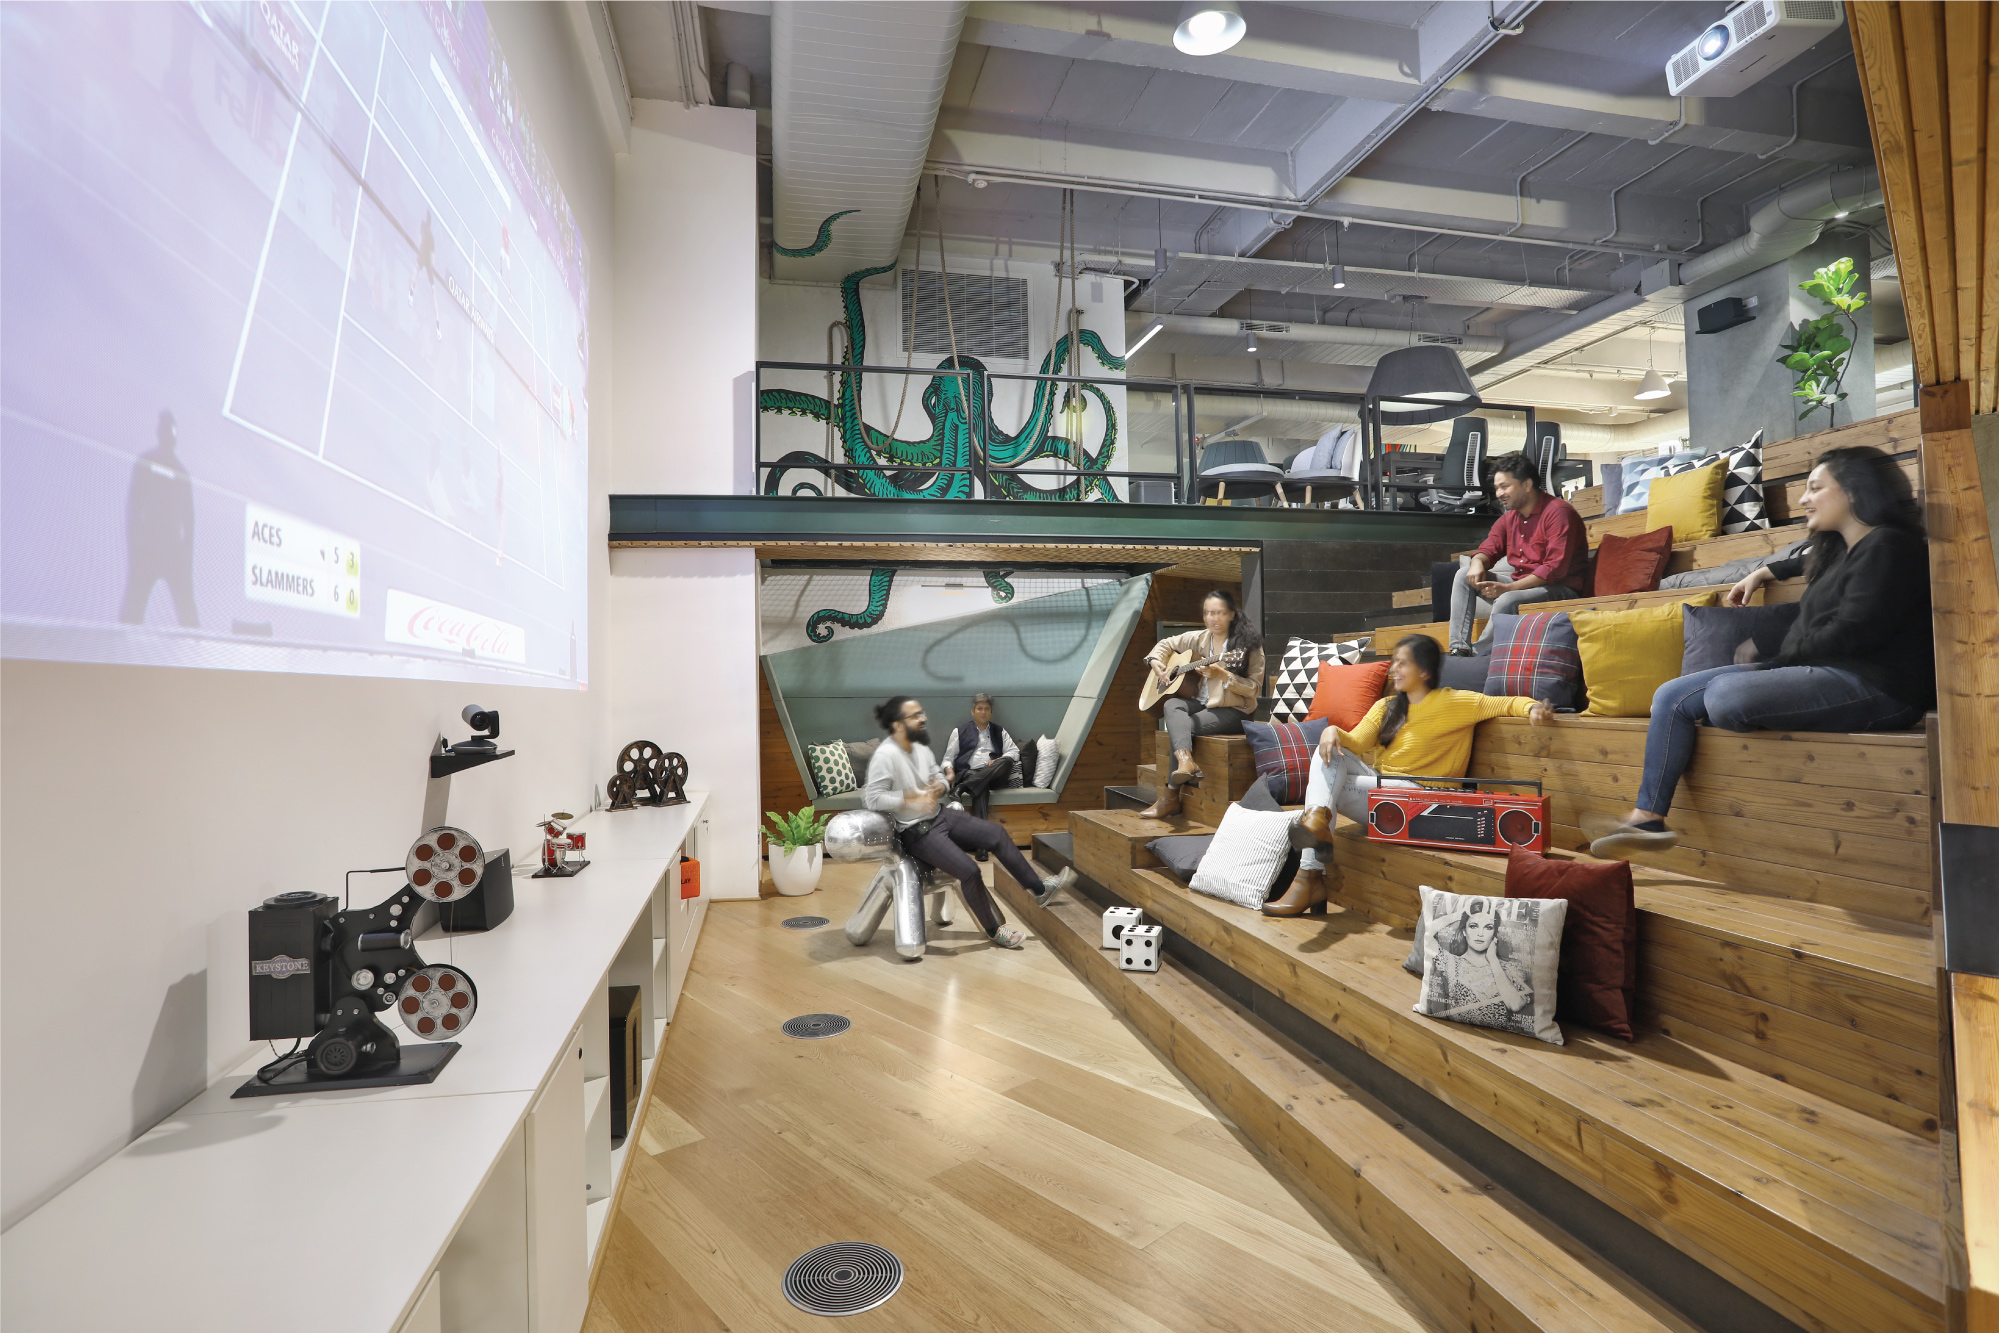 blab  is a step seating area that acts as a zone for our team to connect over tennis matches